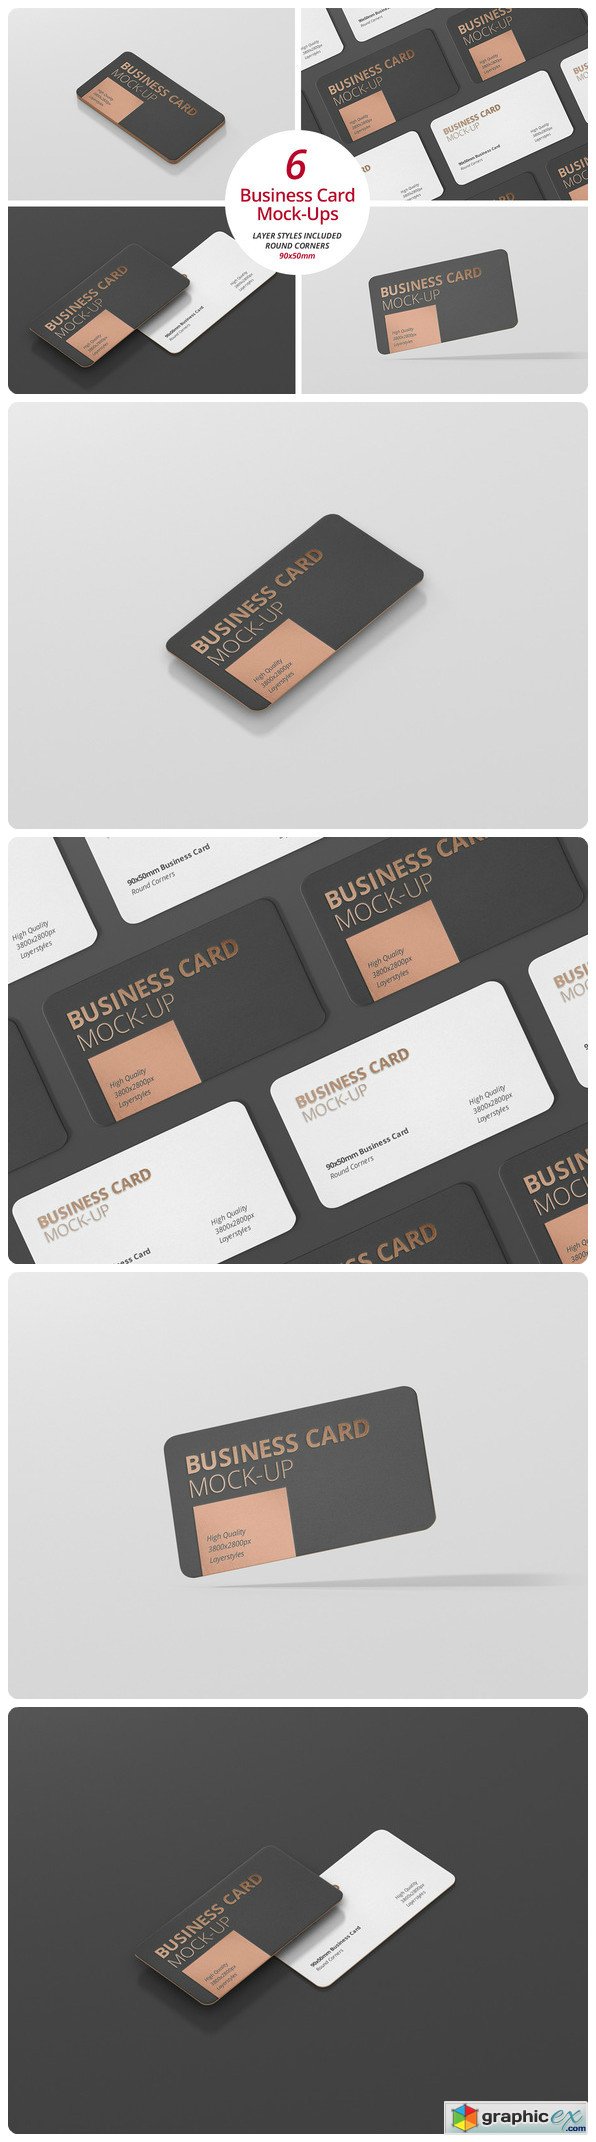 Download Business Card Mockup Round Corner Free Download Vector Stock Image Photoshop Icon PSD Mockup Templates